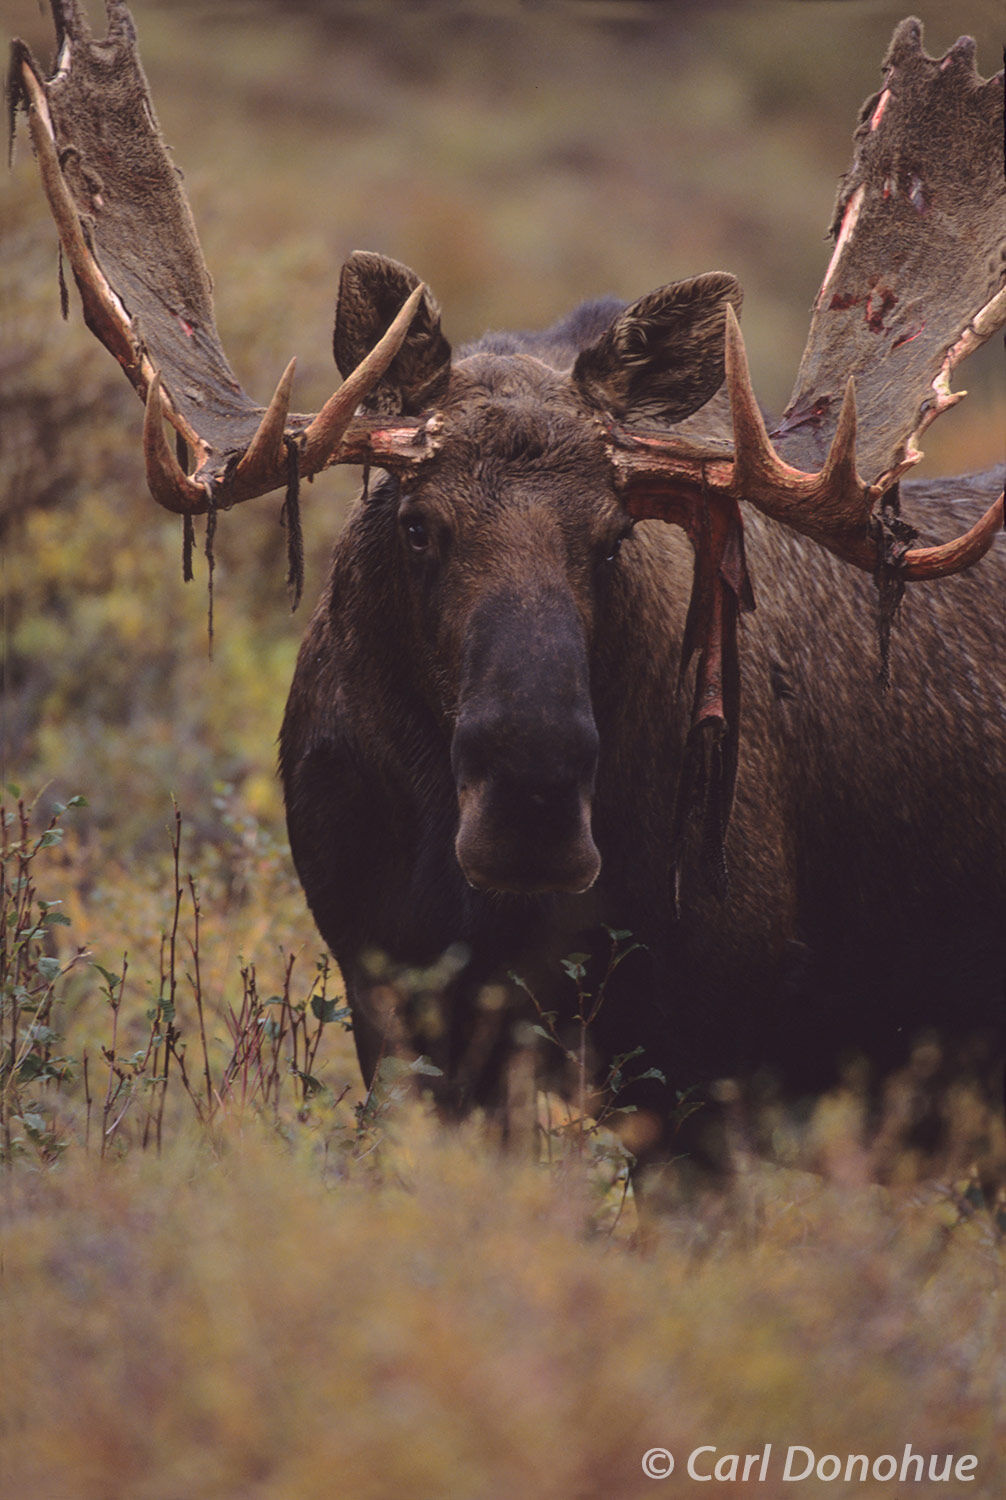 A bull moose stands tall among the fiery reds and oranges of the fall foliage in Denali. Bull moose are a symbol of the rugged...